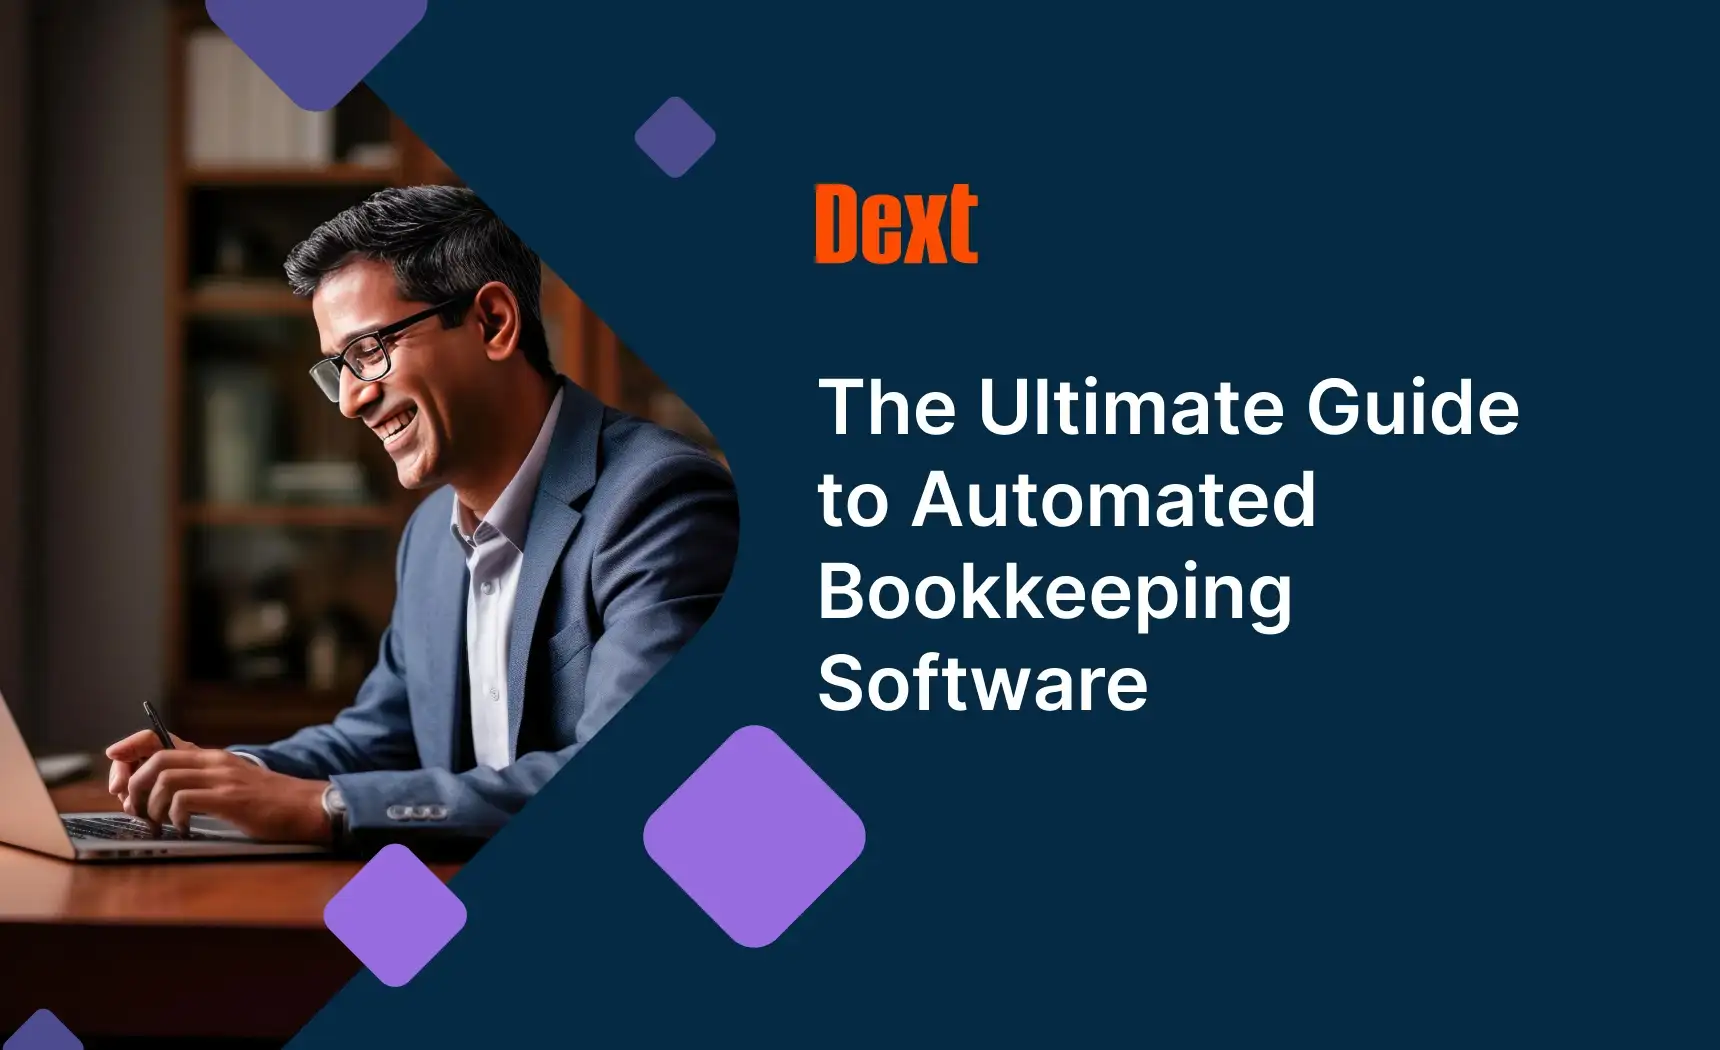 The Ultimate Guide to Automated Bookkeeping Software by Dext image